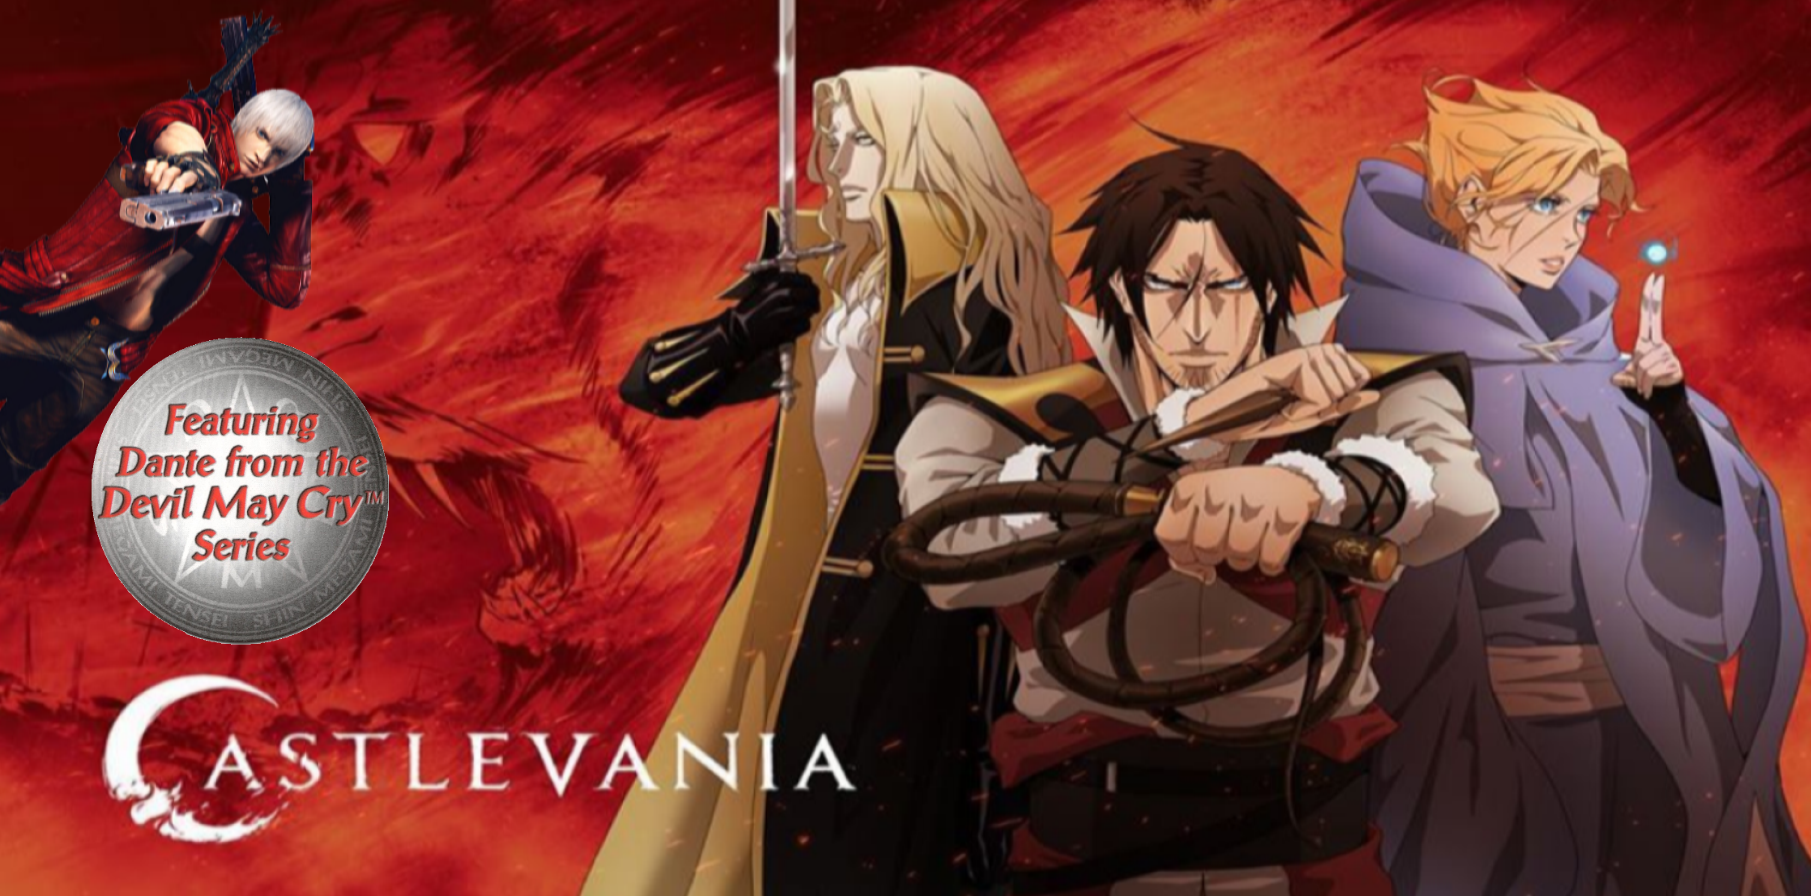 Devil May Cry Castlevania animated series